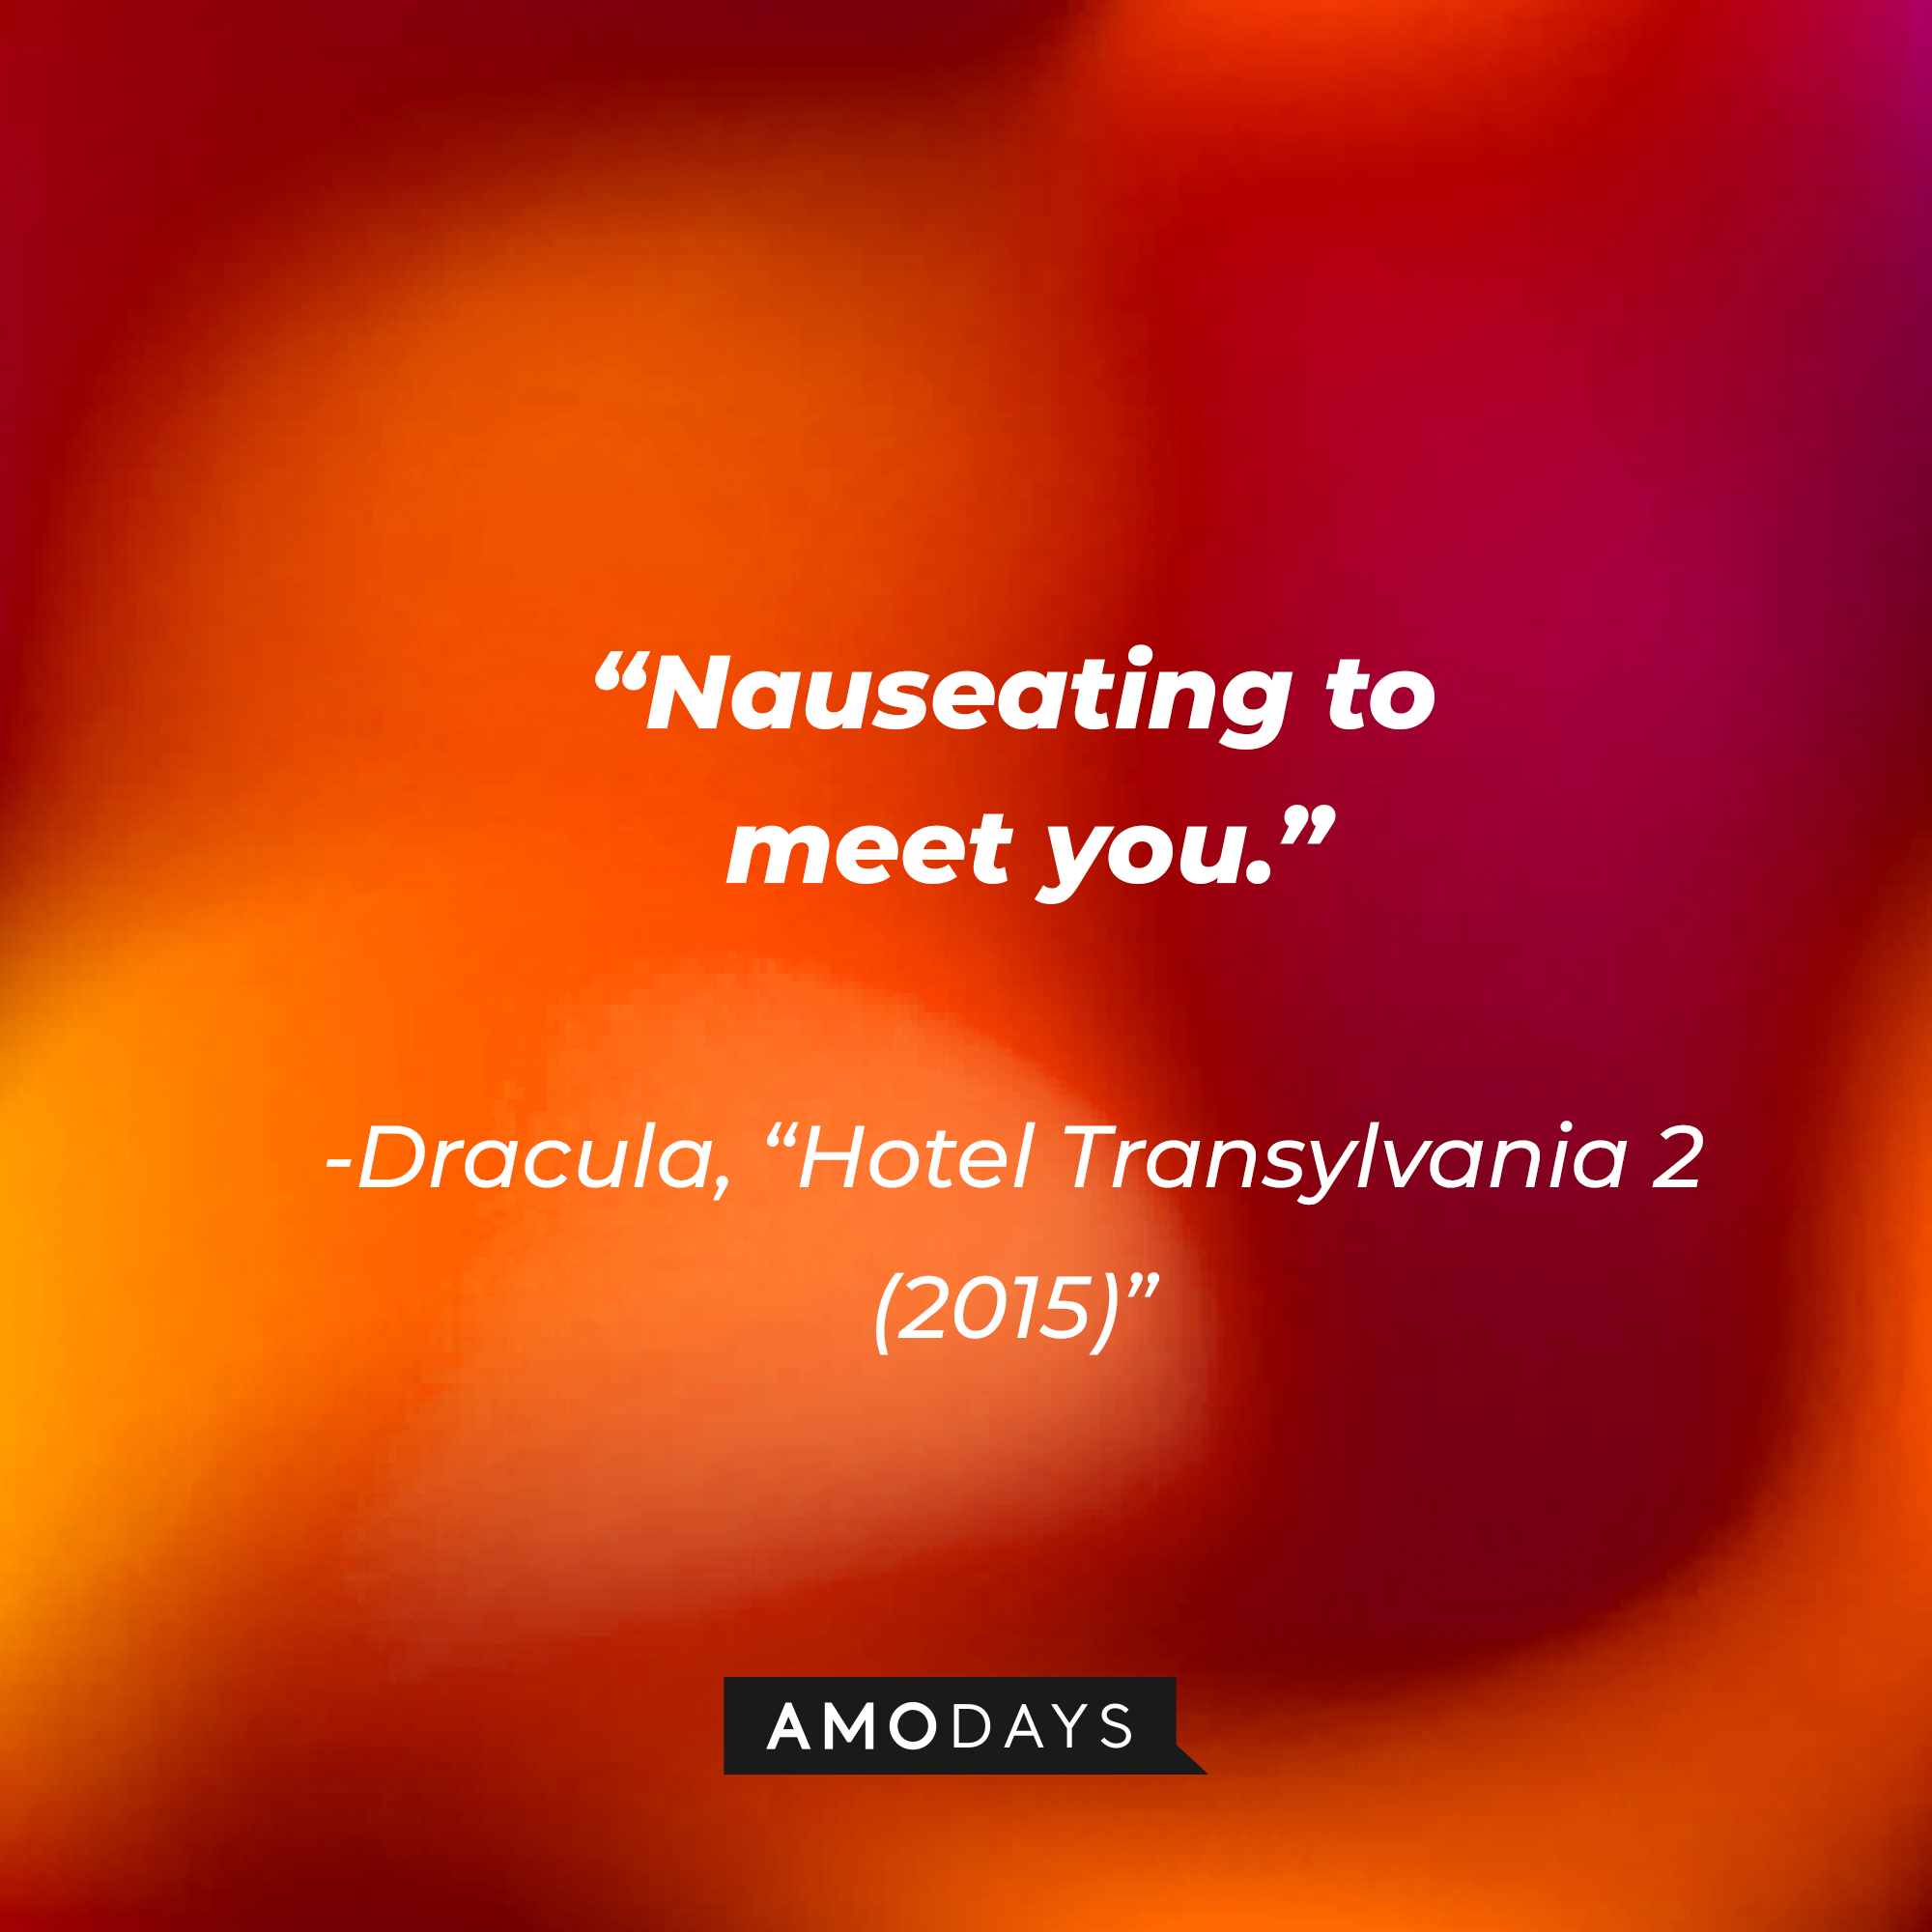 Dracula's quote: “Nauseating to meet you.” | Source: Amodays